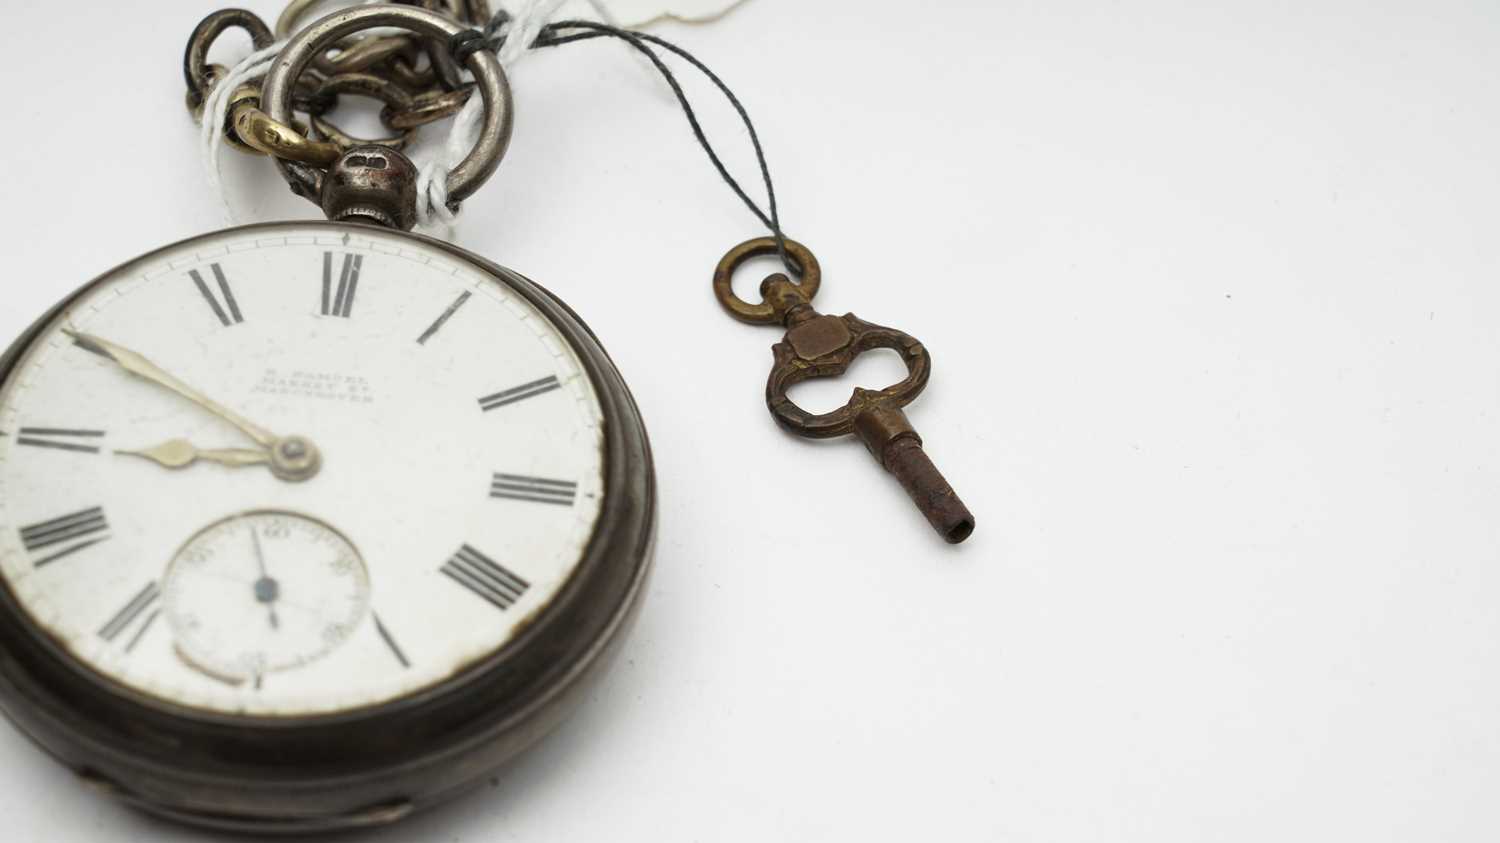 A silver case open-faced pocket watch and chains - Image 5 of 11